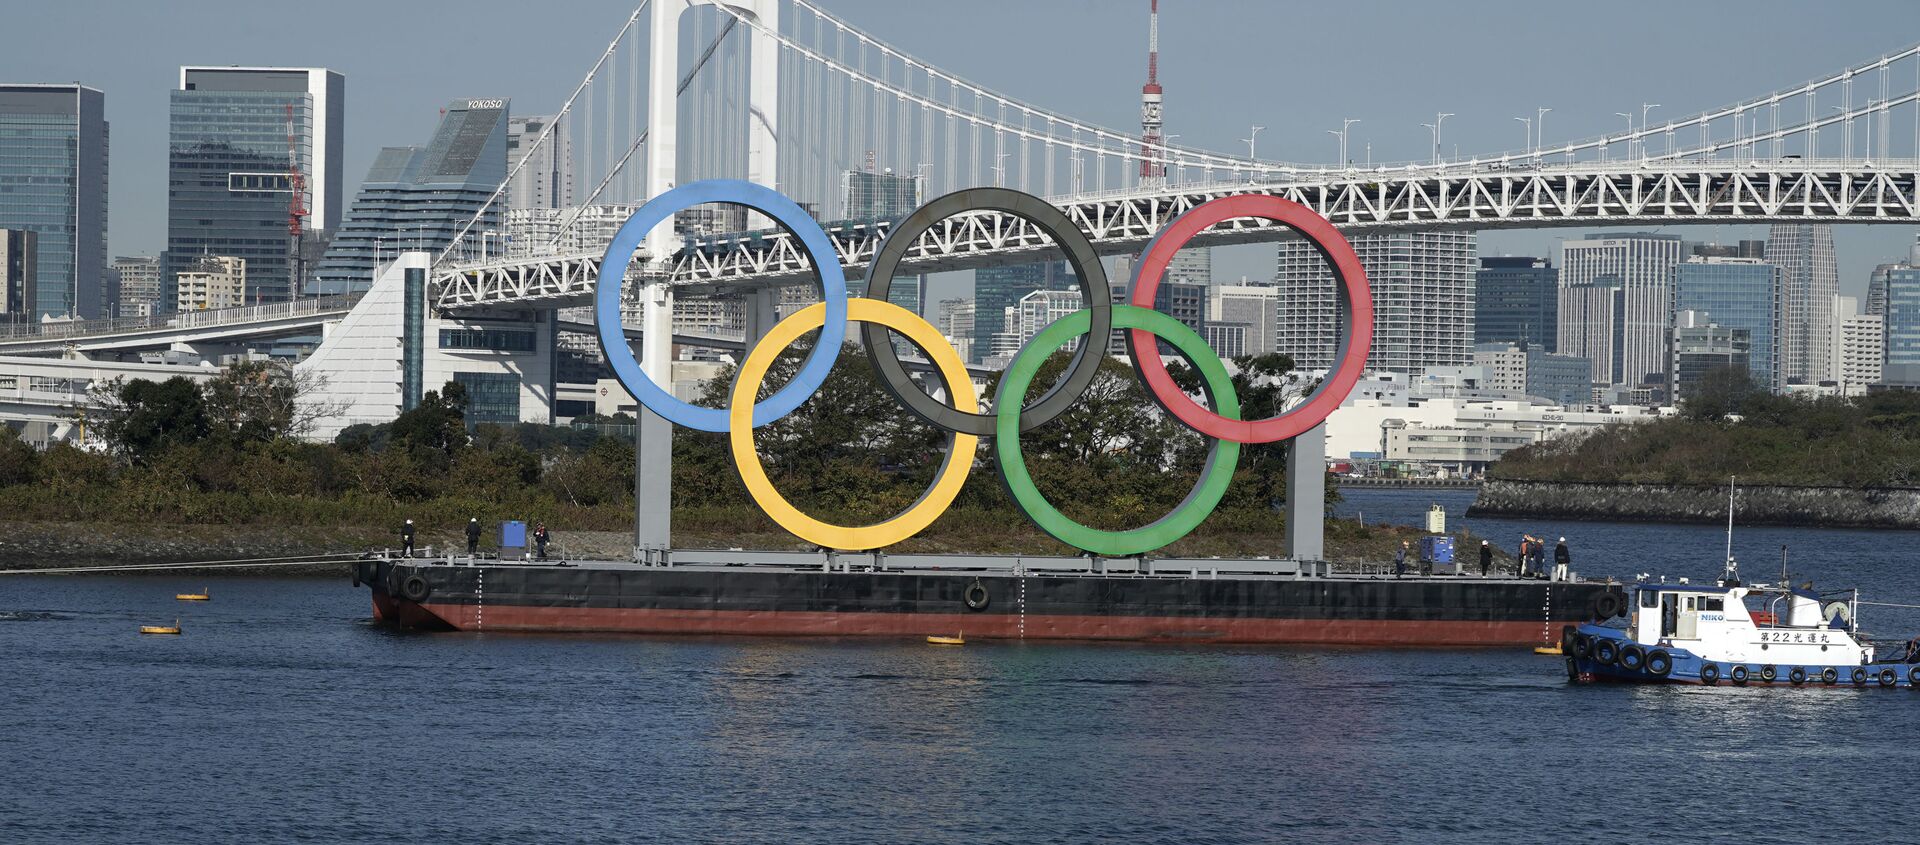 The Olympic Symbol is reinstated after it was taken down for maintenance ahead of the postponed Tokyo 2020 Olympics in the Odaiba section, Tokyo Bay, Tuesday, 1 December 2020. - Sputnik International, 1920, 11.03.2021